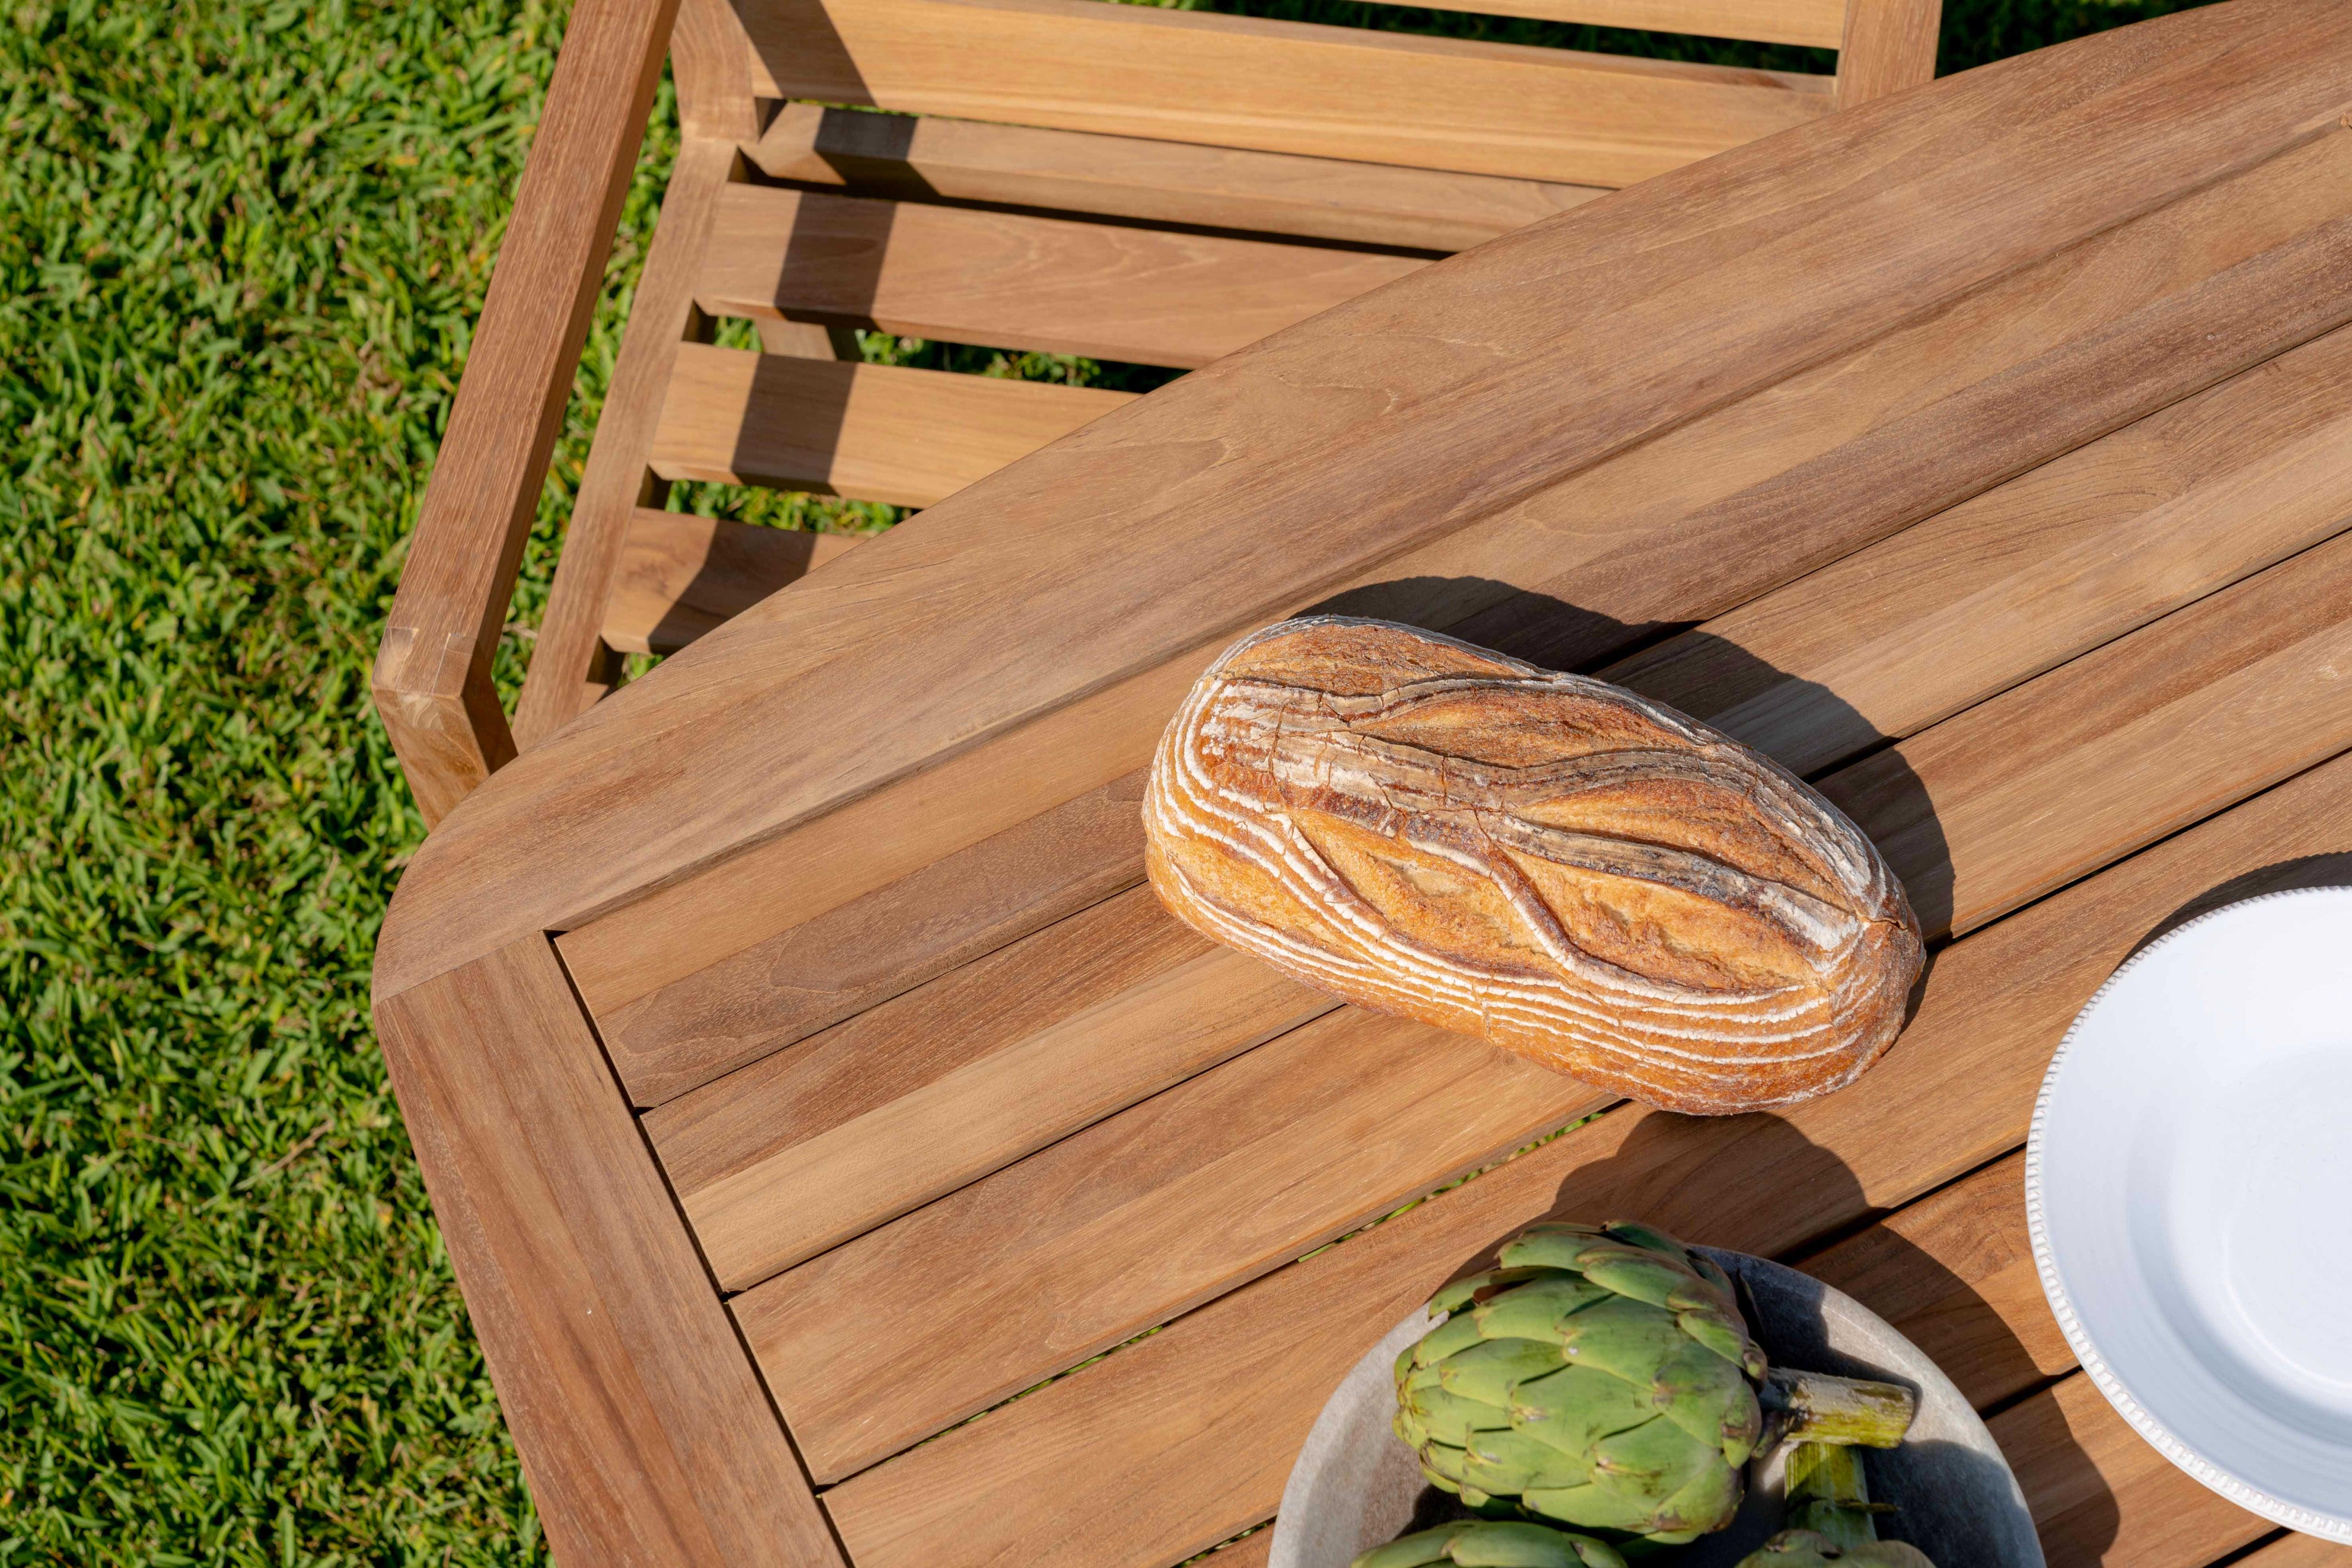 Highest Quality Outdoor Teak Extension Table With Seating For 8 That Will Really Last